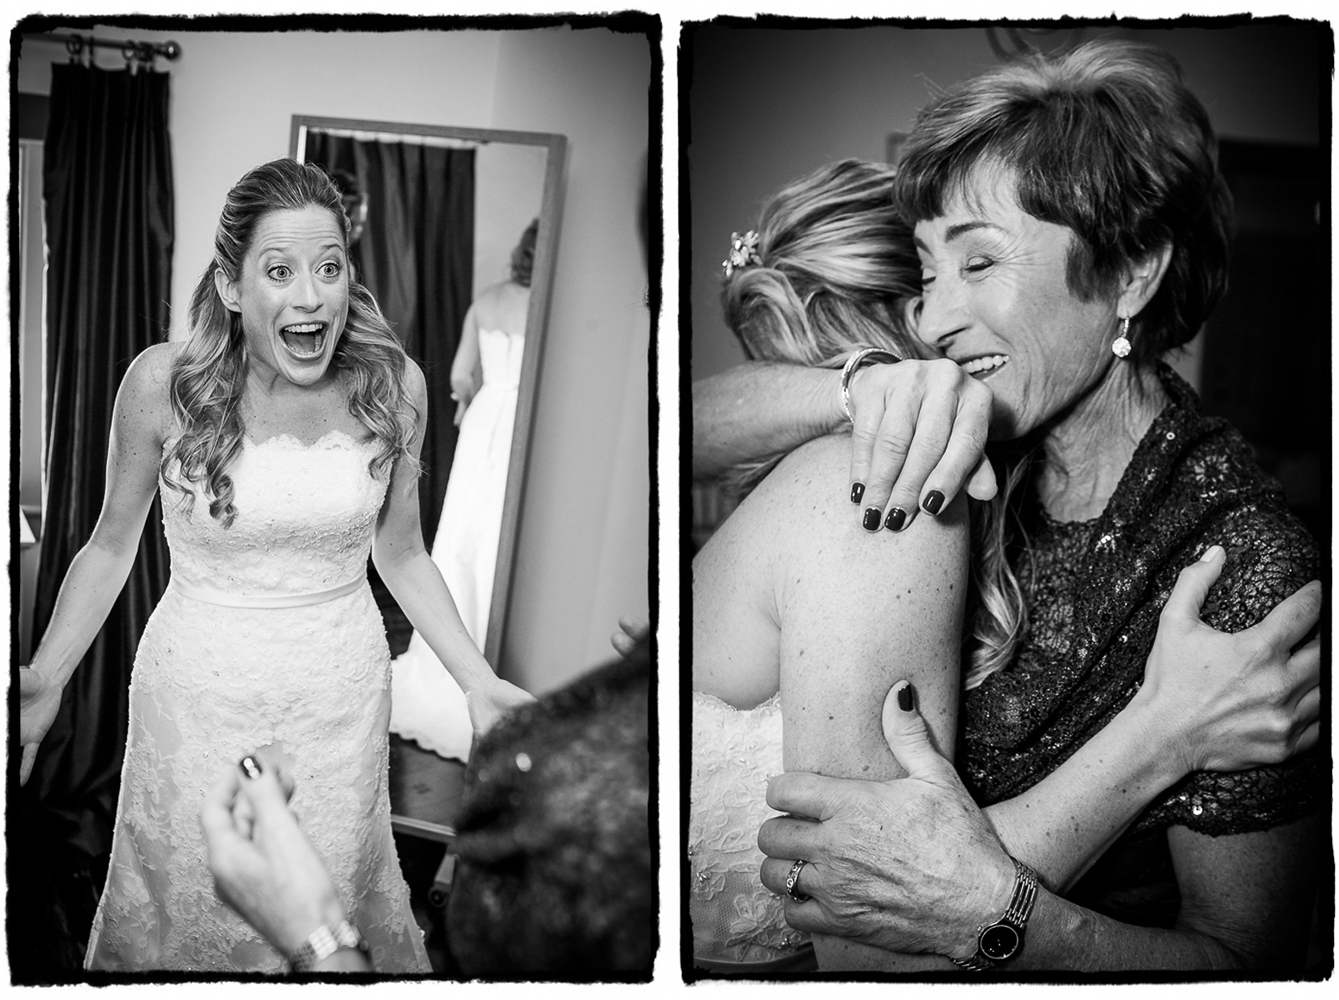 Noelle and her mother share an excited hug after she put her dress on for the wedding.